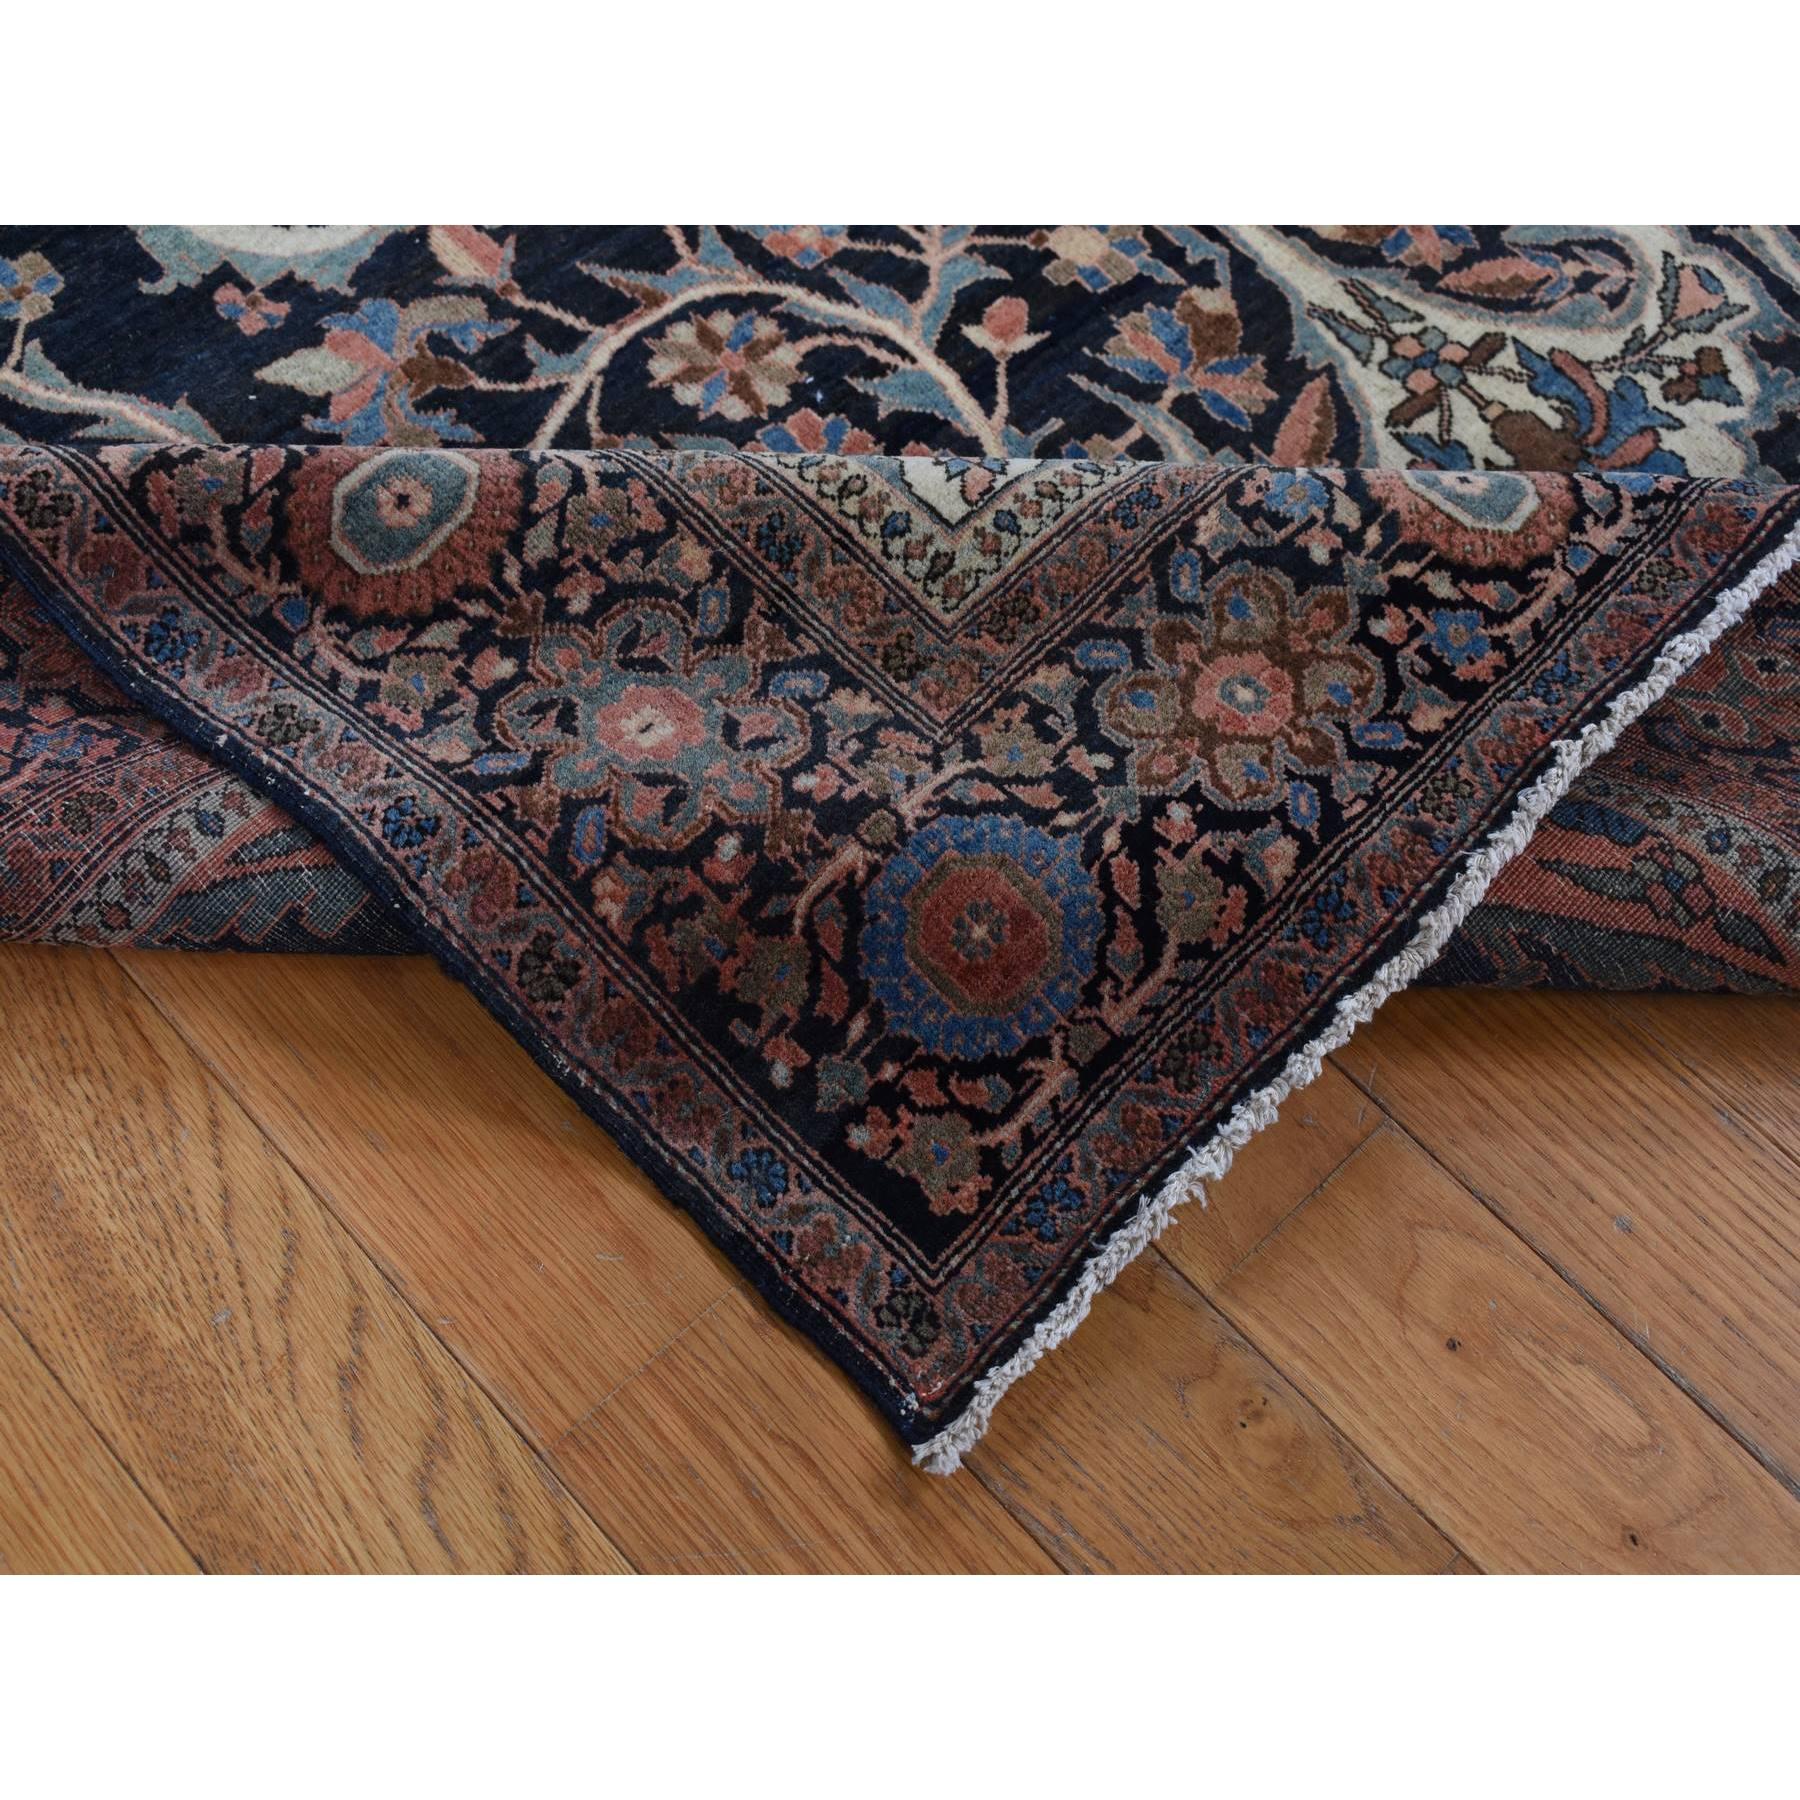 Brown Antique Persian Fereghan Sarouk Clean Soft Even Wear Wool Hand Knotted Rug In Excellent Condition For Sale In Carlstadt, NJ